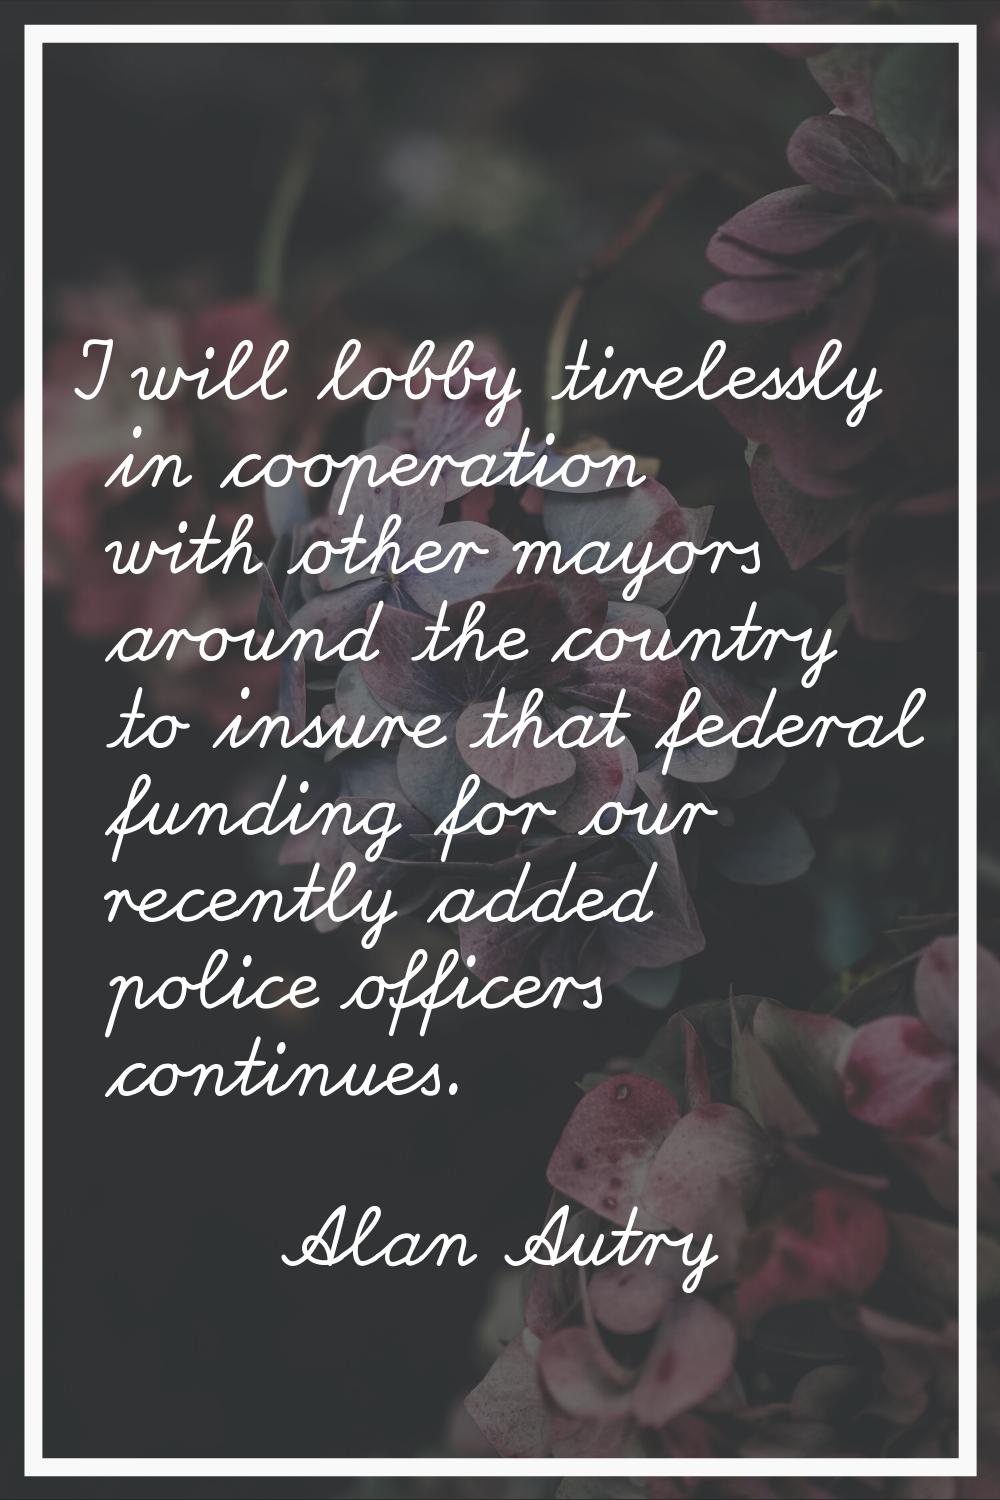 I will lobby tirelessly in cooperation with other mayors around the country to insure that federal 